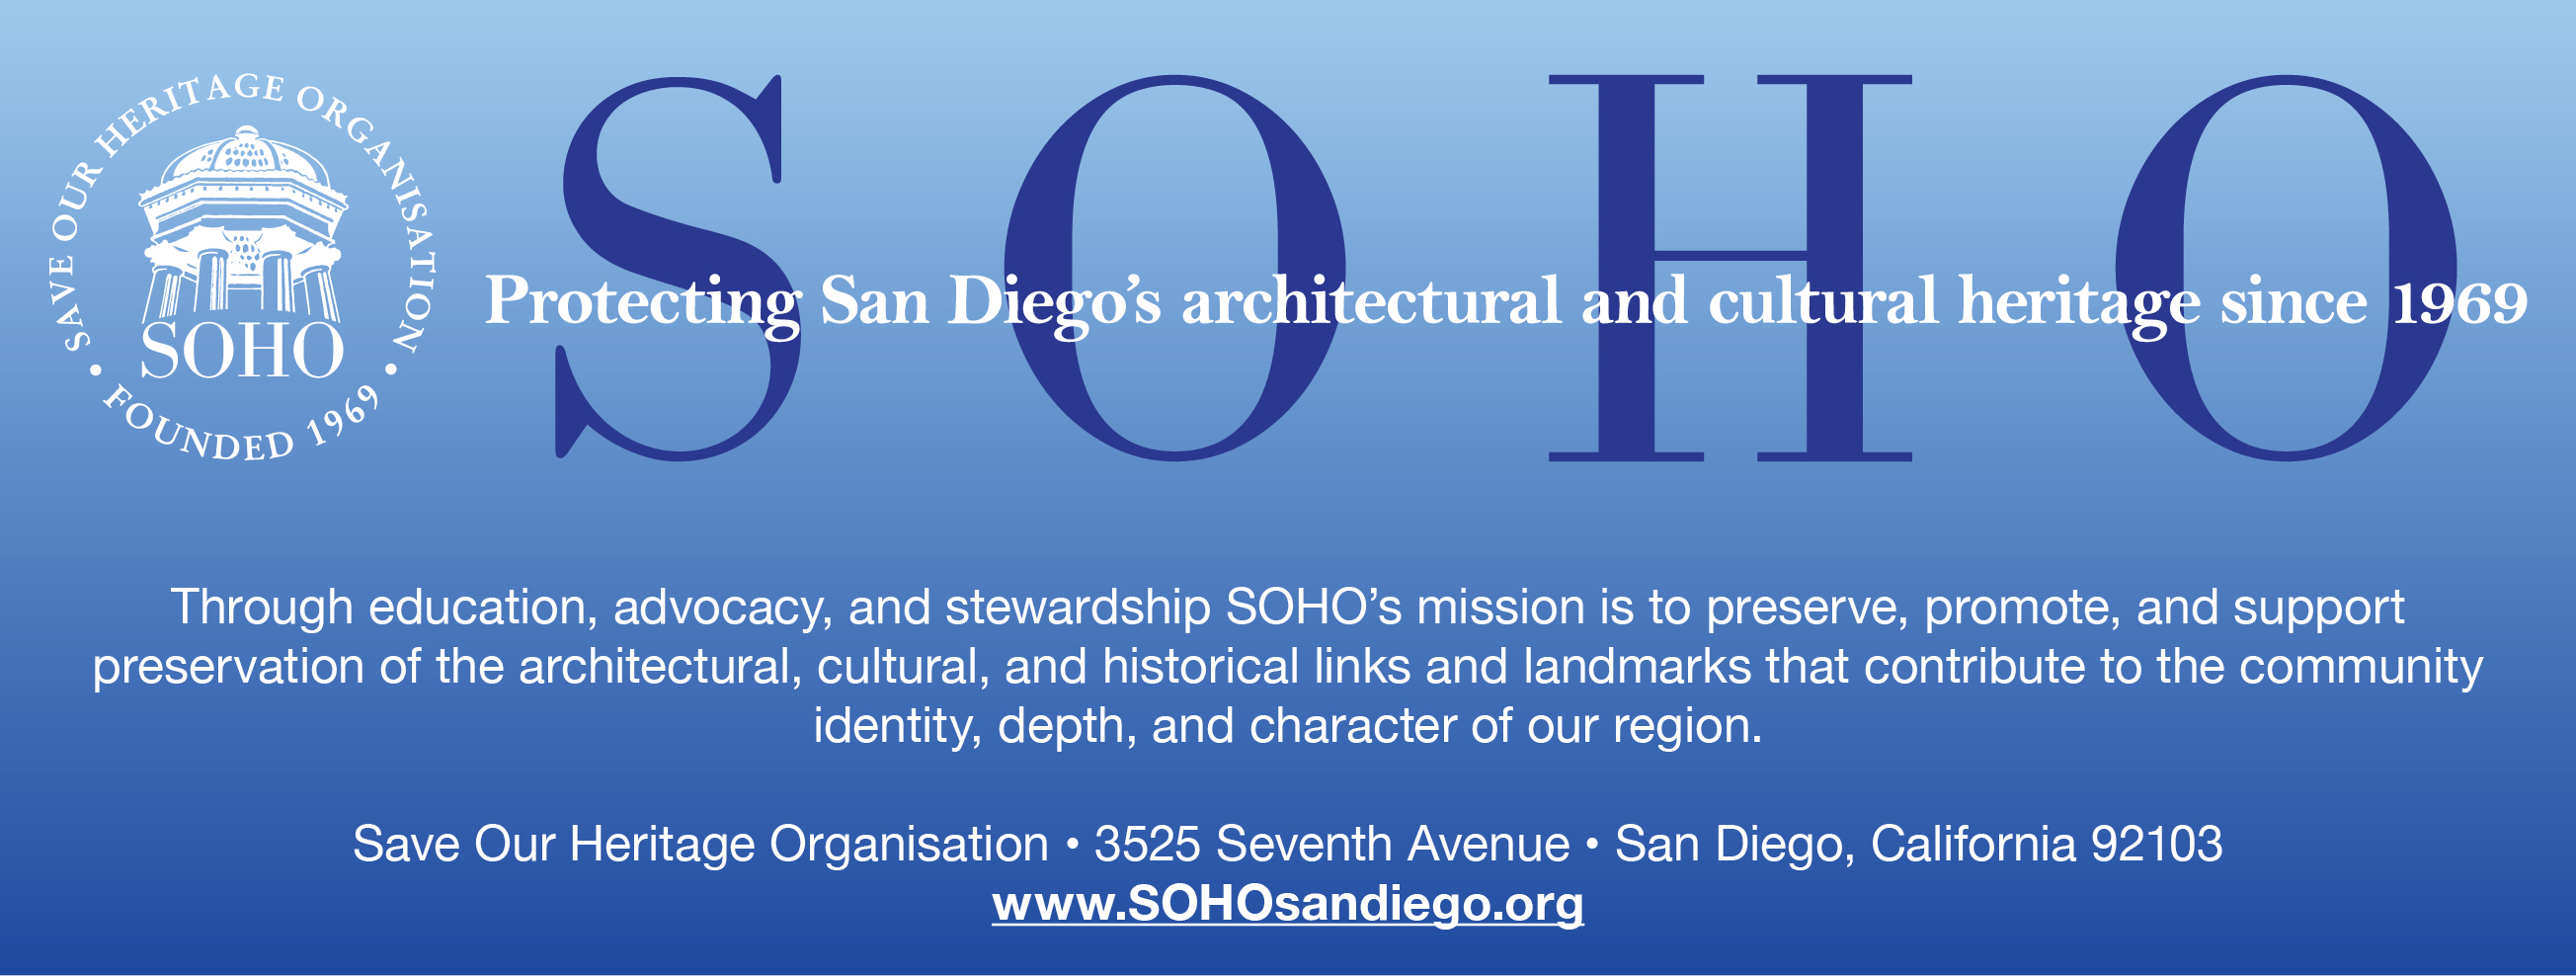 Protecting San Diego's architectural and cultural heritage since 1969.